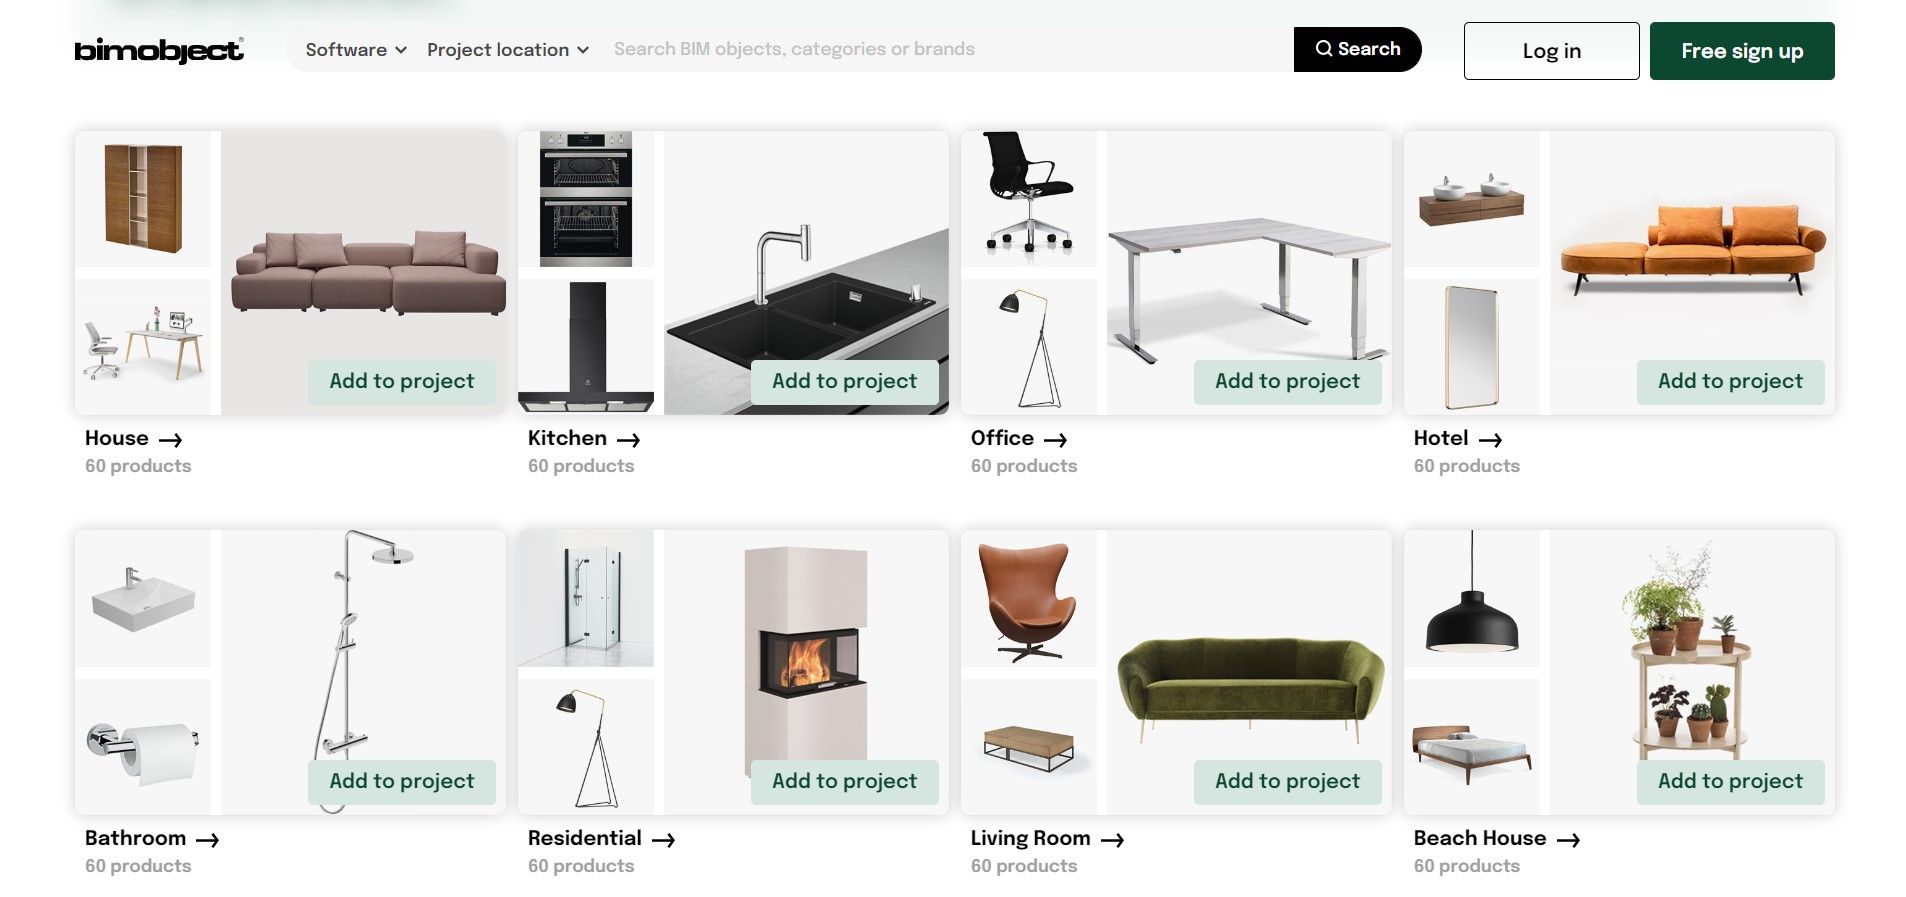 Screenshot of different types of furniture as BIM objects as seen on the BIMObject website